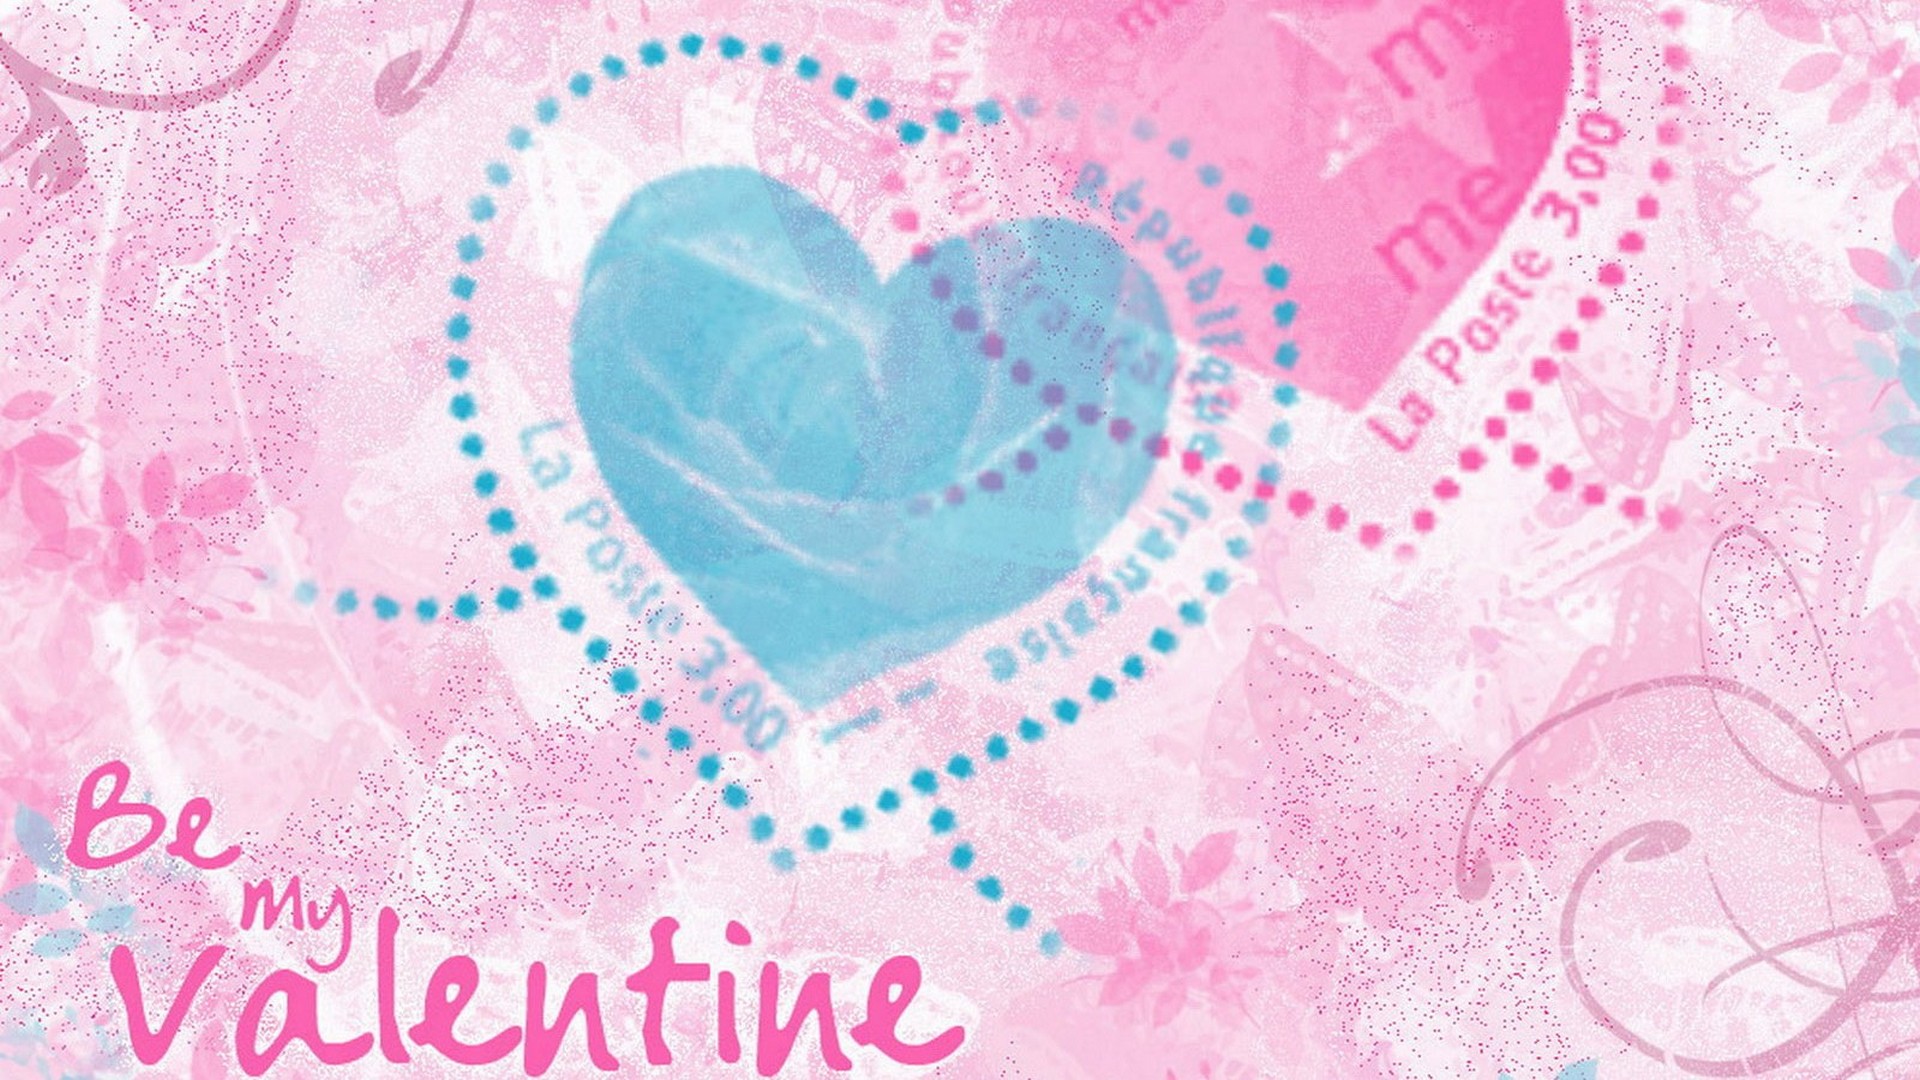 Valentines Day Wallpaper Images 1920x1080